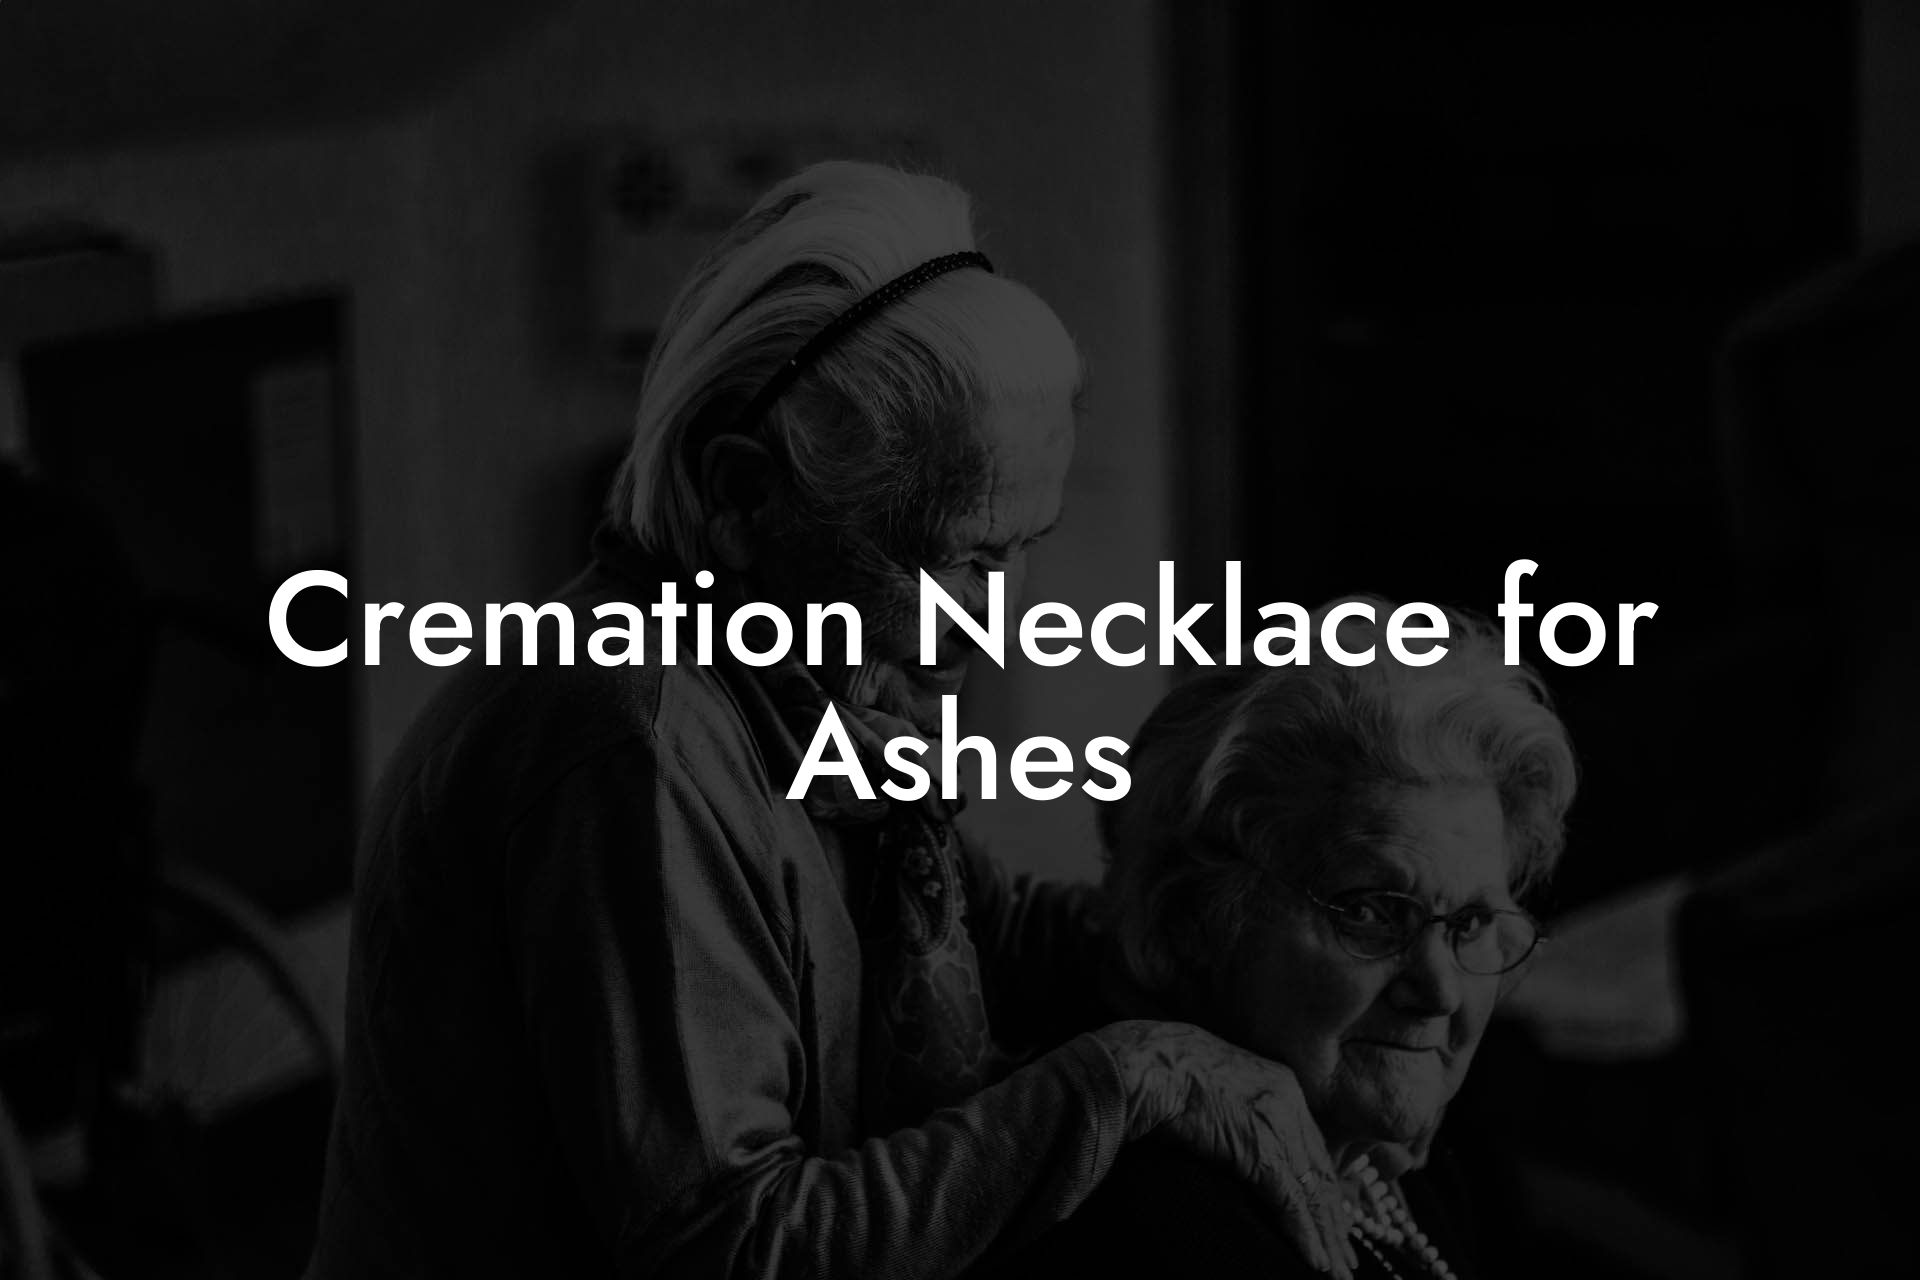 Cremation Necklace for Ashes